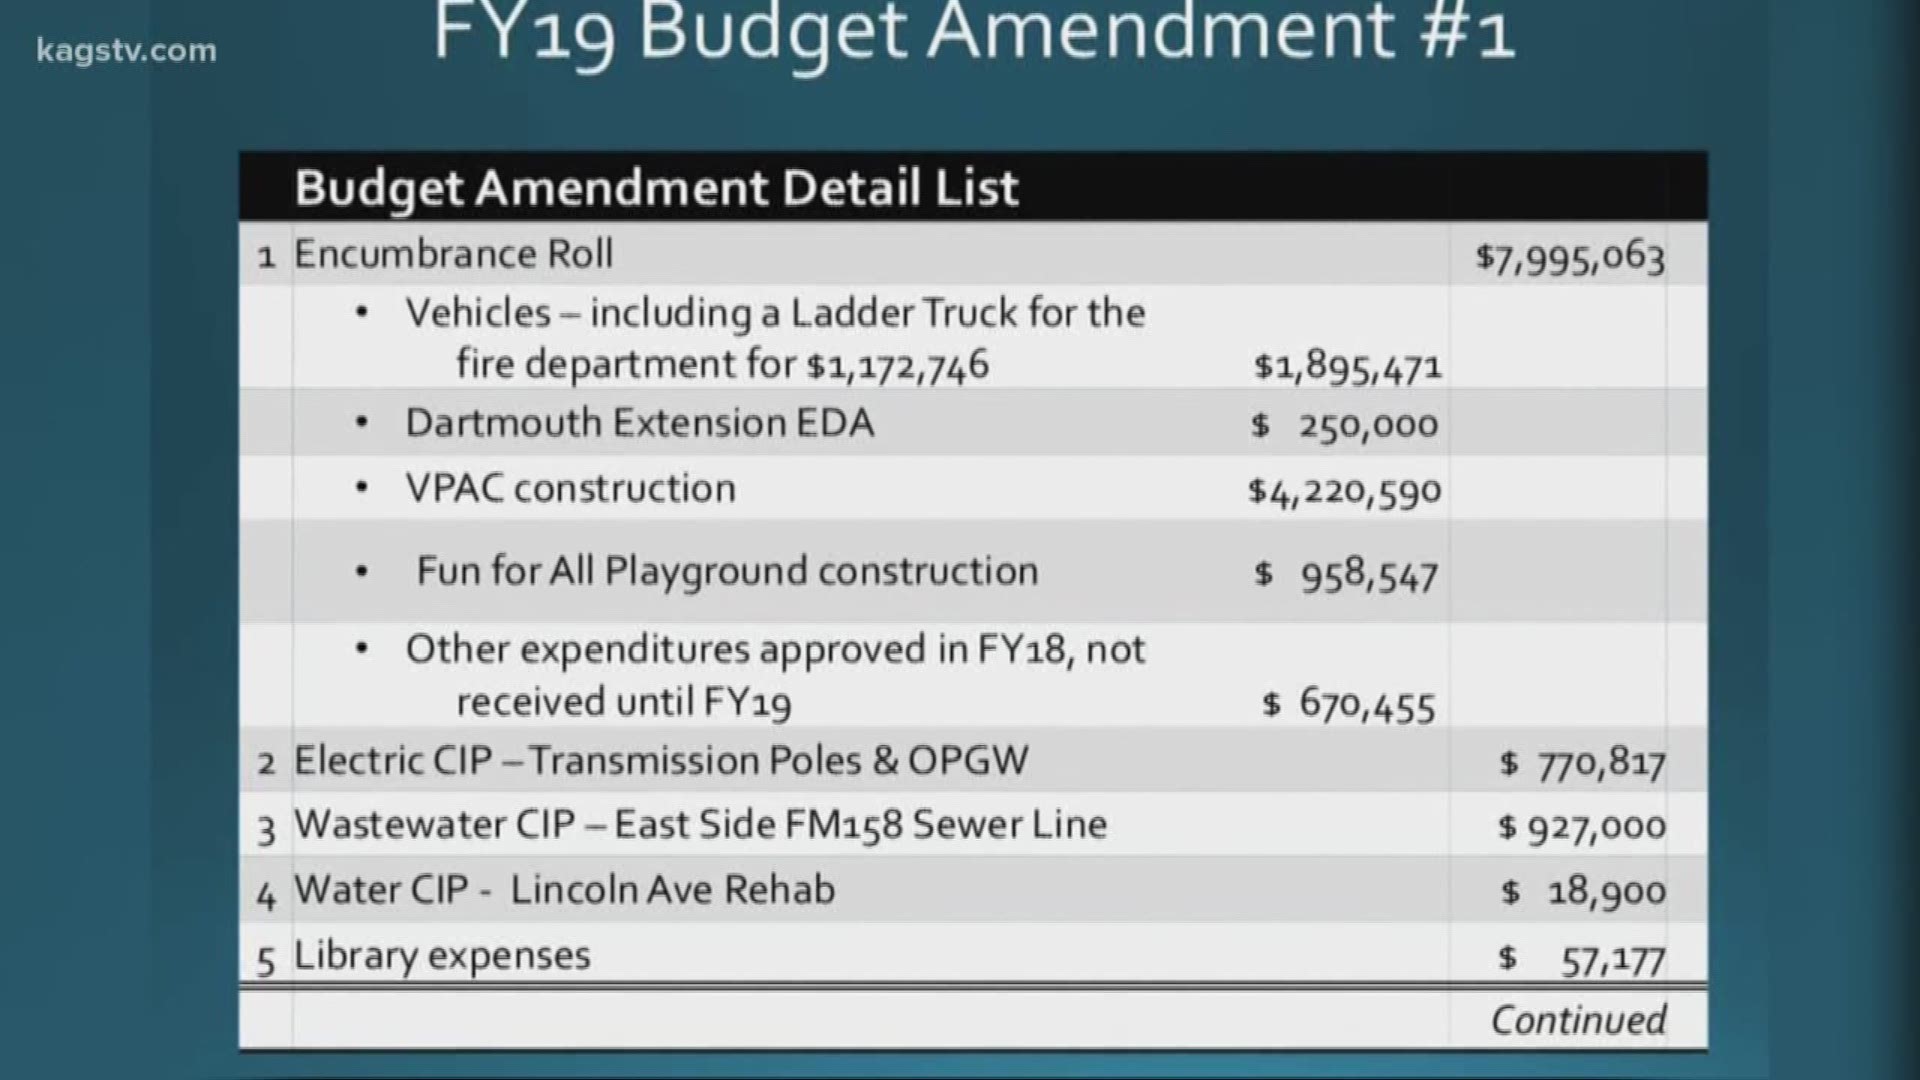 The city council unanimously approved a $13.8 million budget amendment.